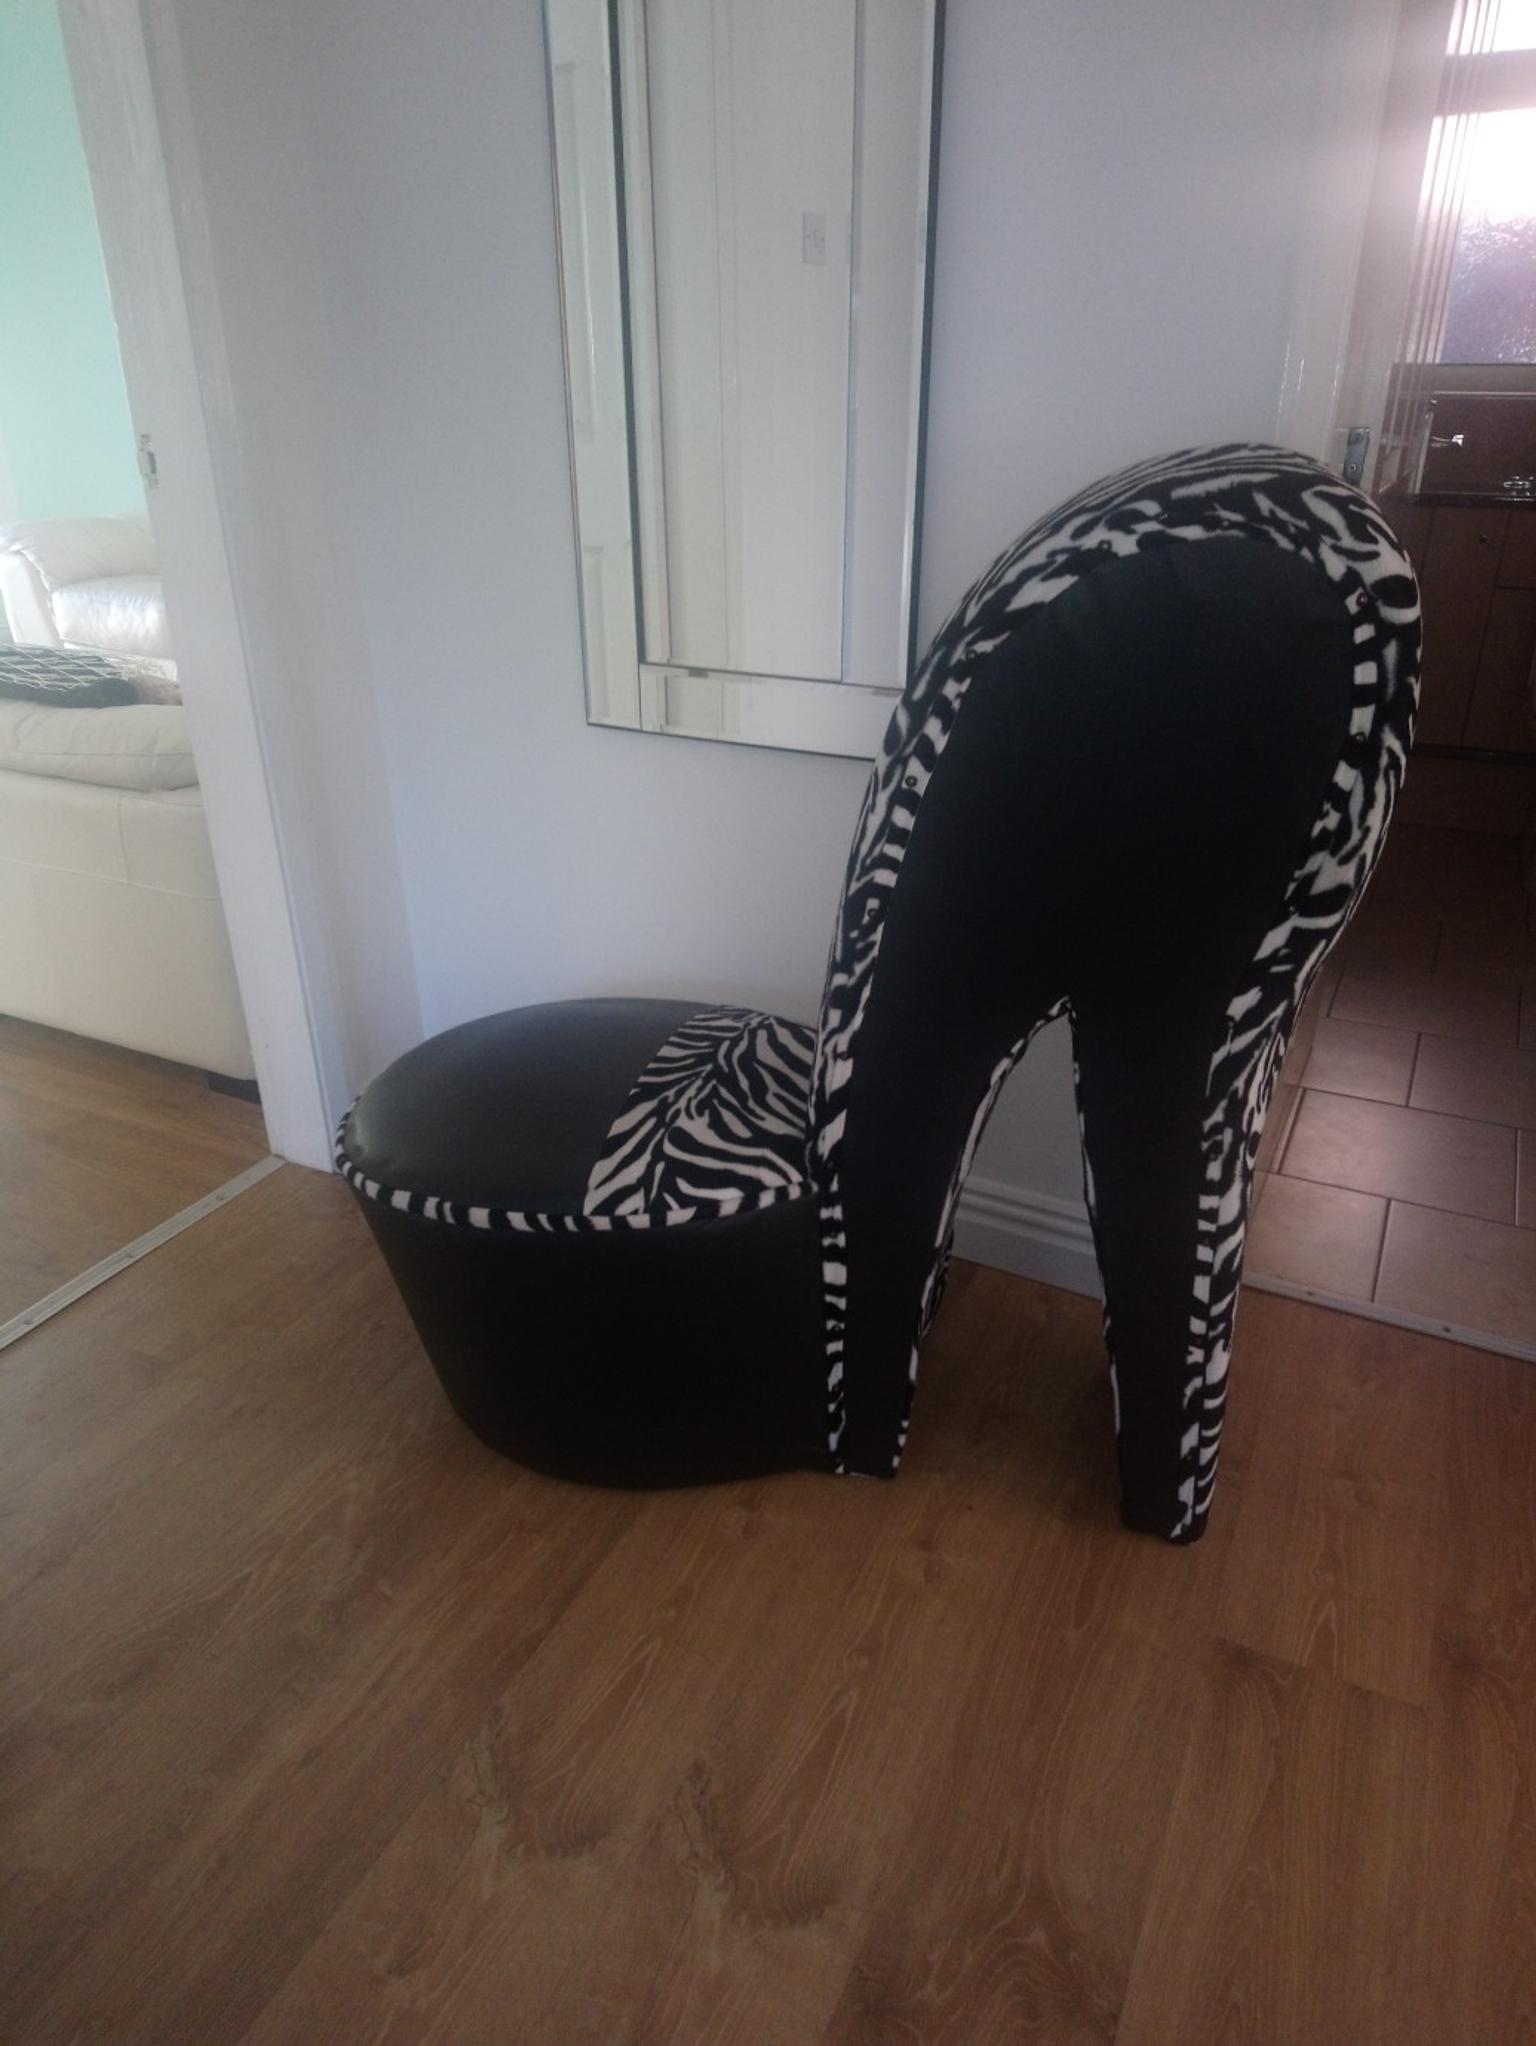 High Heel Stiletto Shoe Chair In Stoke On Trent For 50 00 For